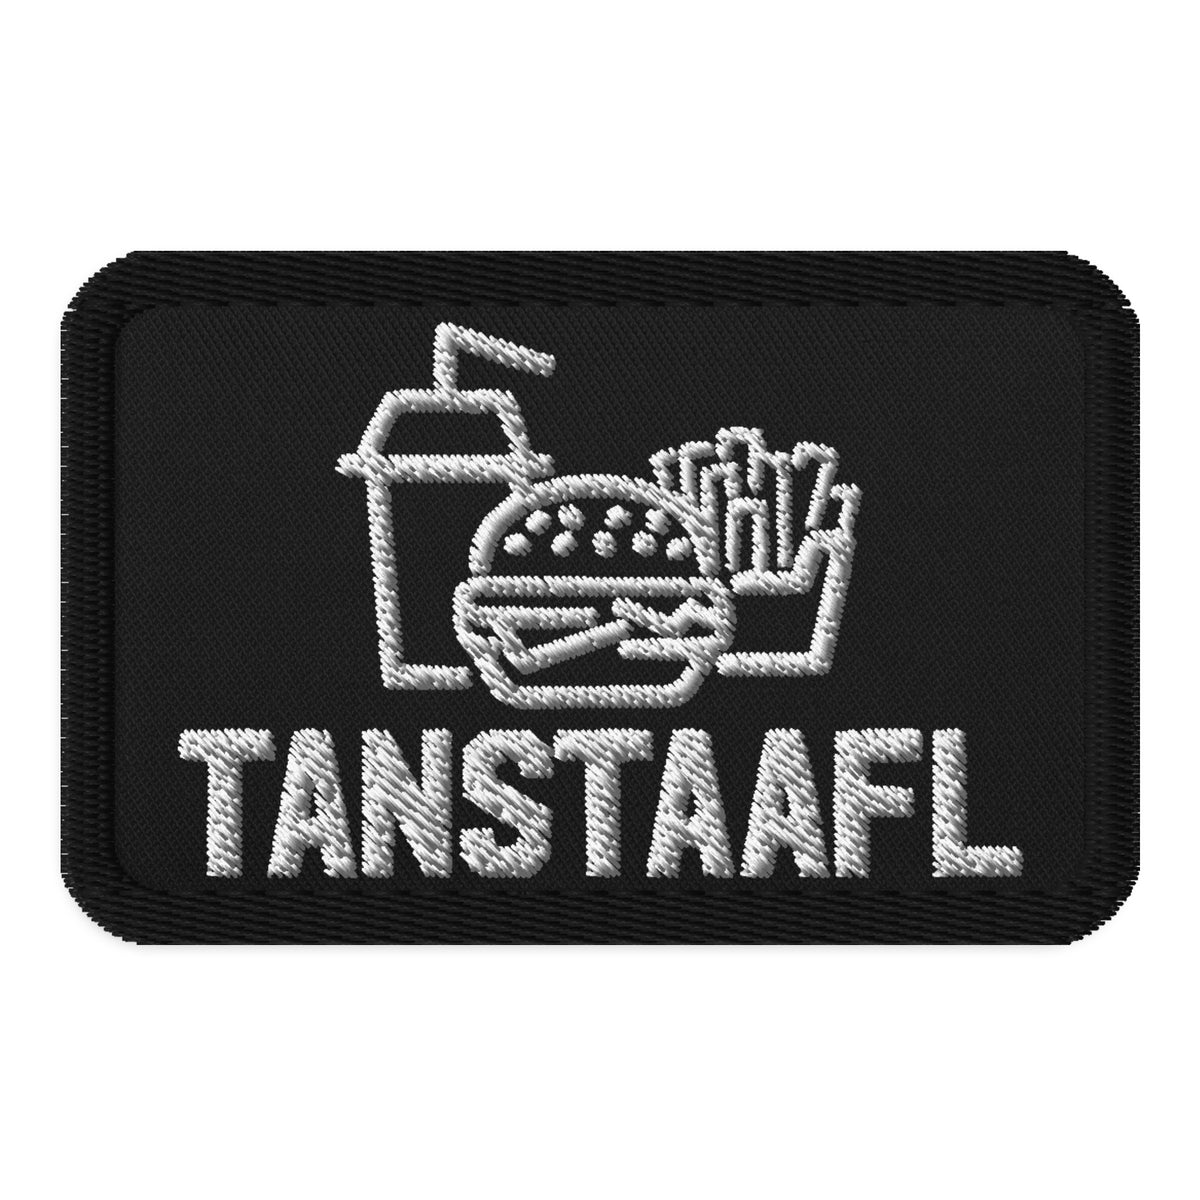 TANSTAAFL Morale Patch